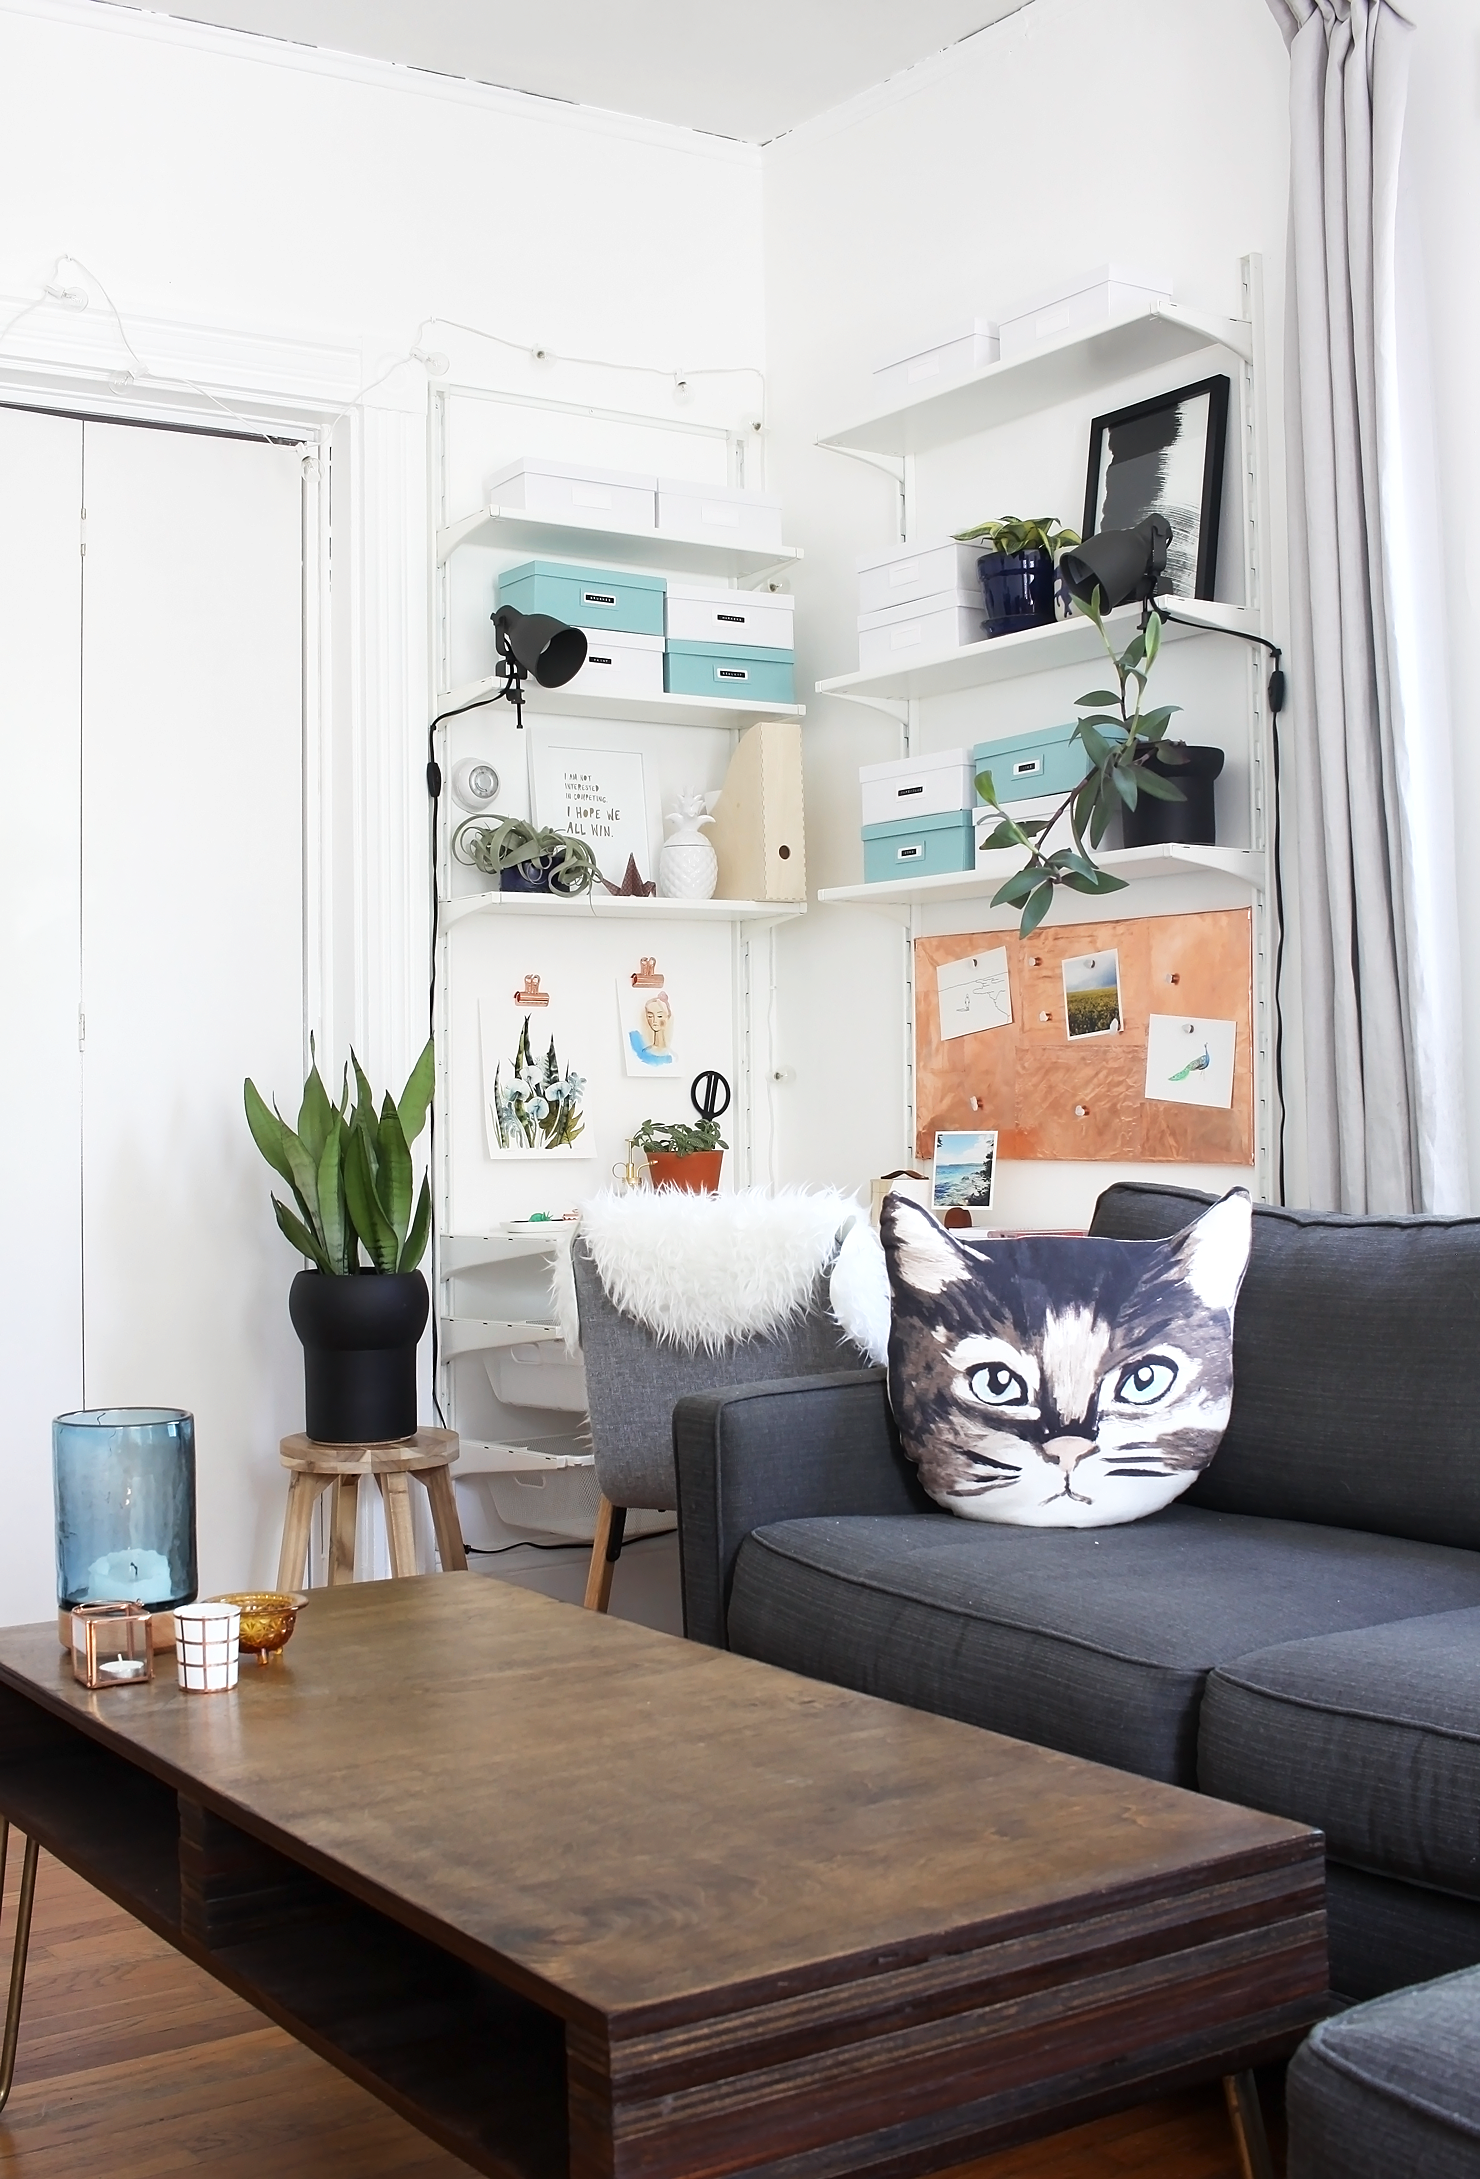 It's so easy to create a Scandinavian workspace in your rental apartment.